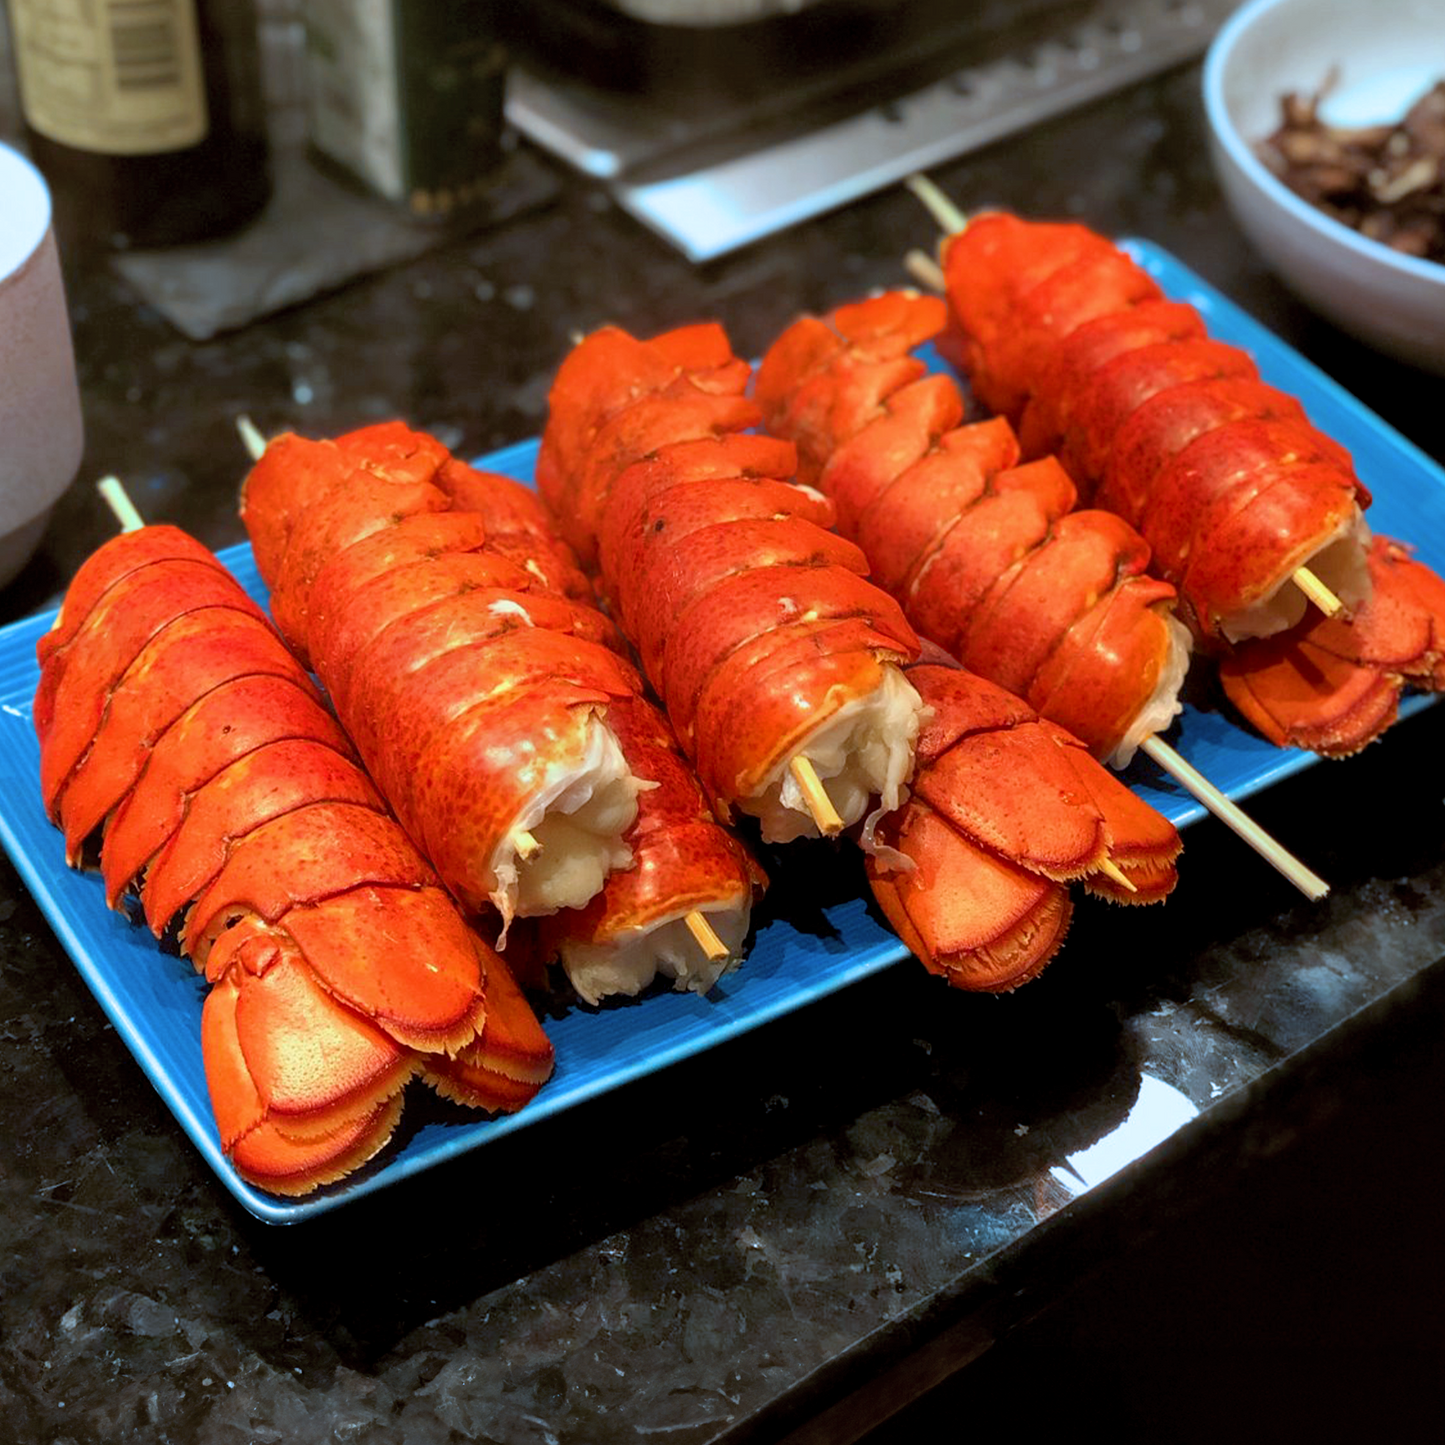 Buy 10 Maine Cocktail Lobster Tails, Get 10 FREE(3-4 oz) + Free Shipping